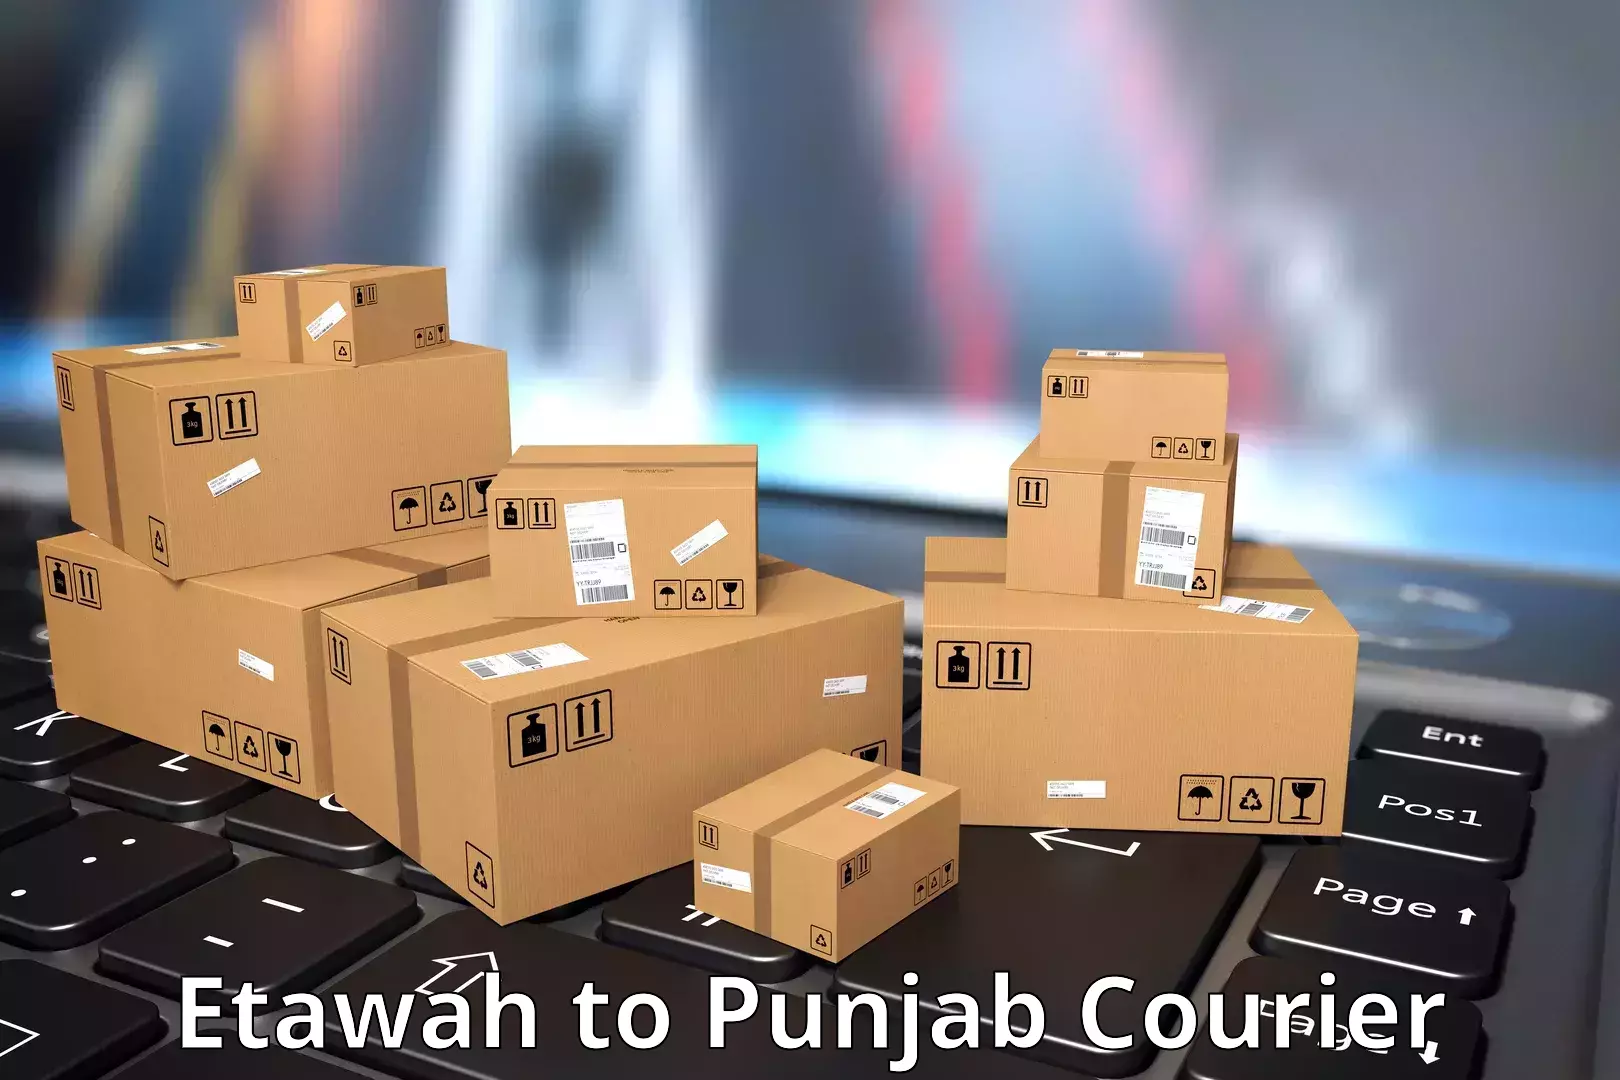 Secure package delivery Etawah to Mohali